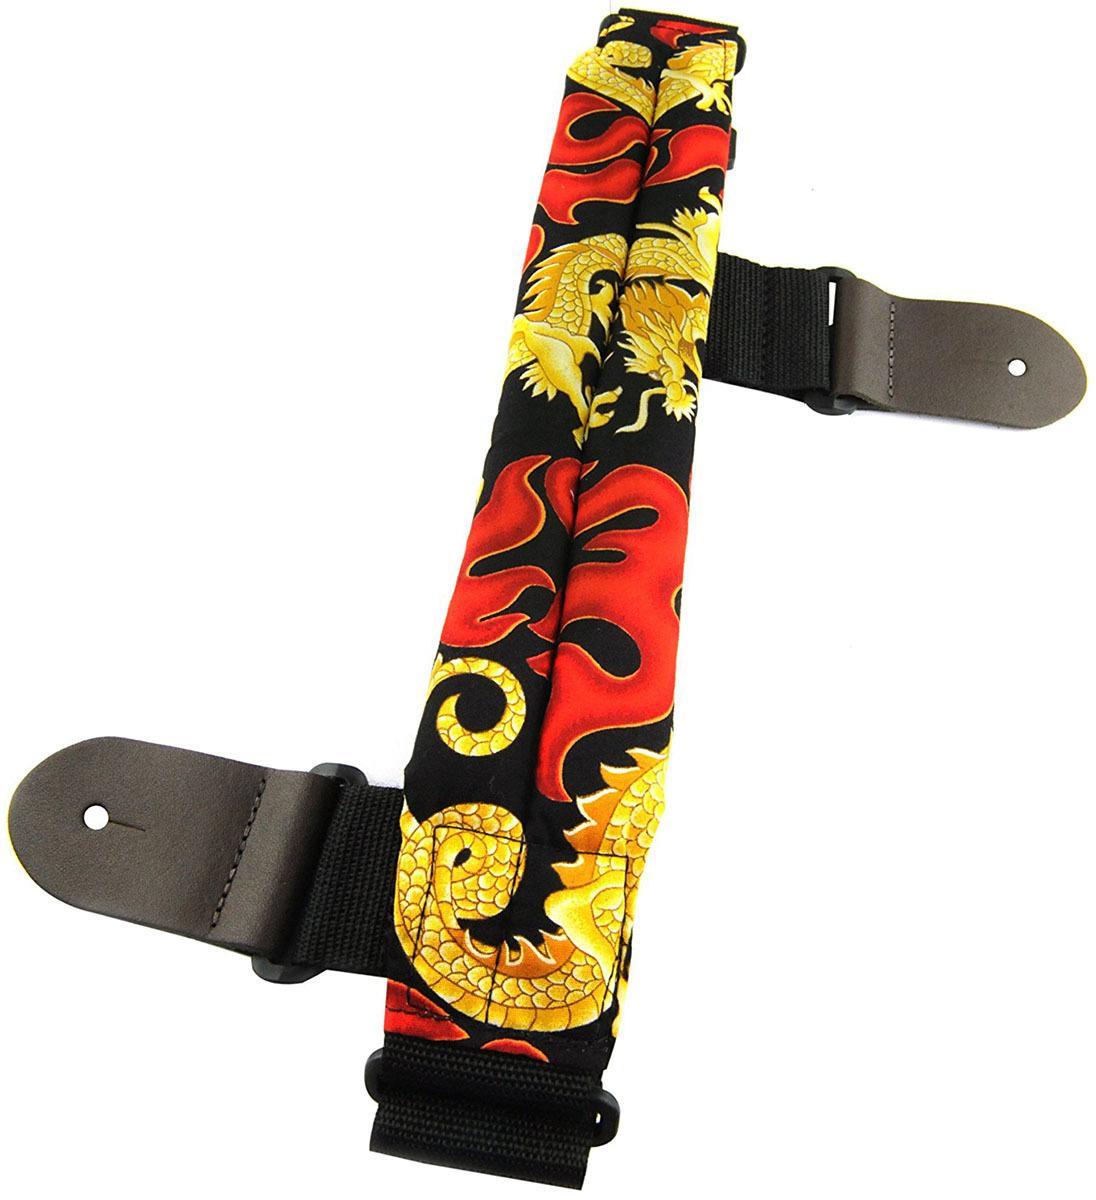 Perri's Tough Nylon Guitar Straps with Shoulder Pad and Leather Ends [Model: 001]